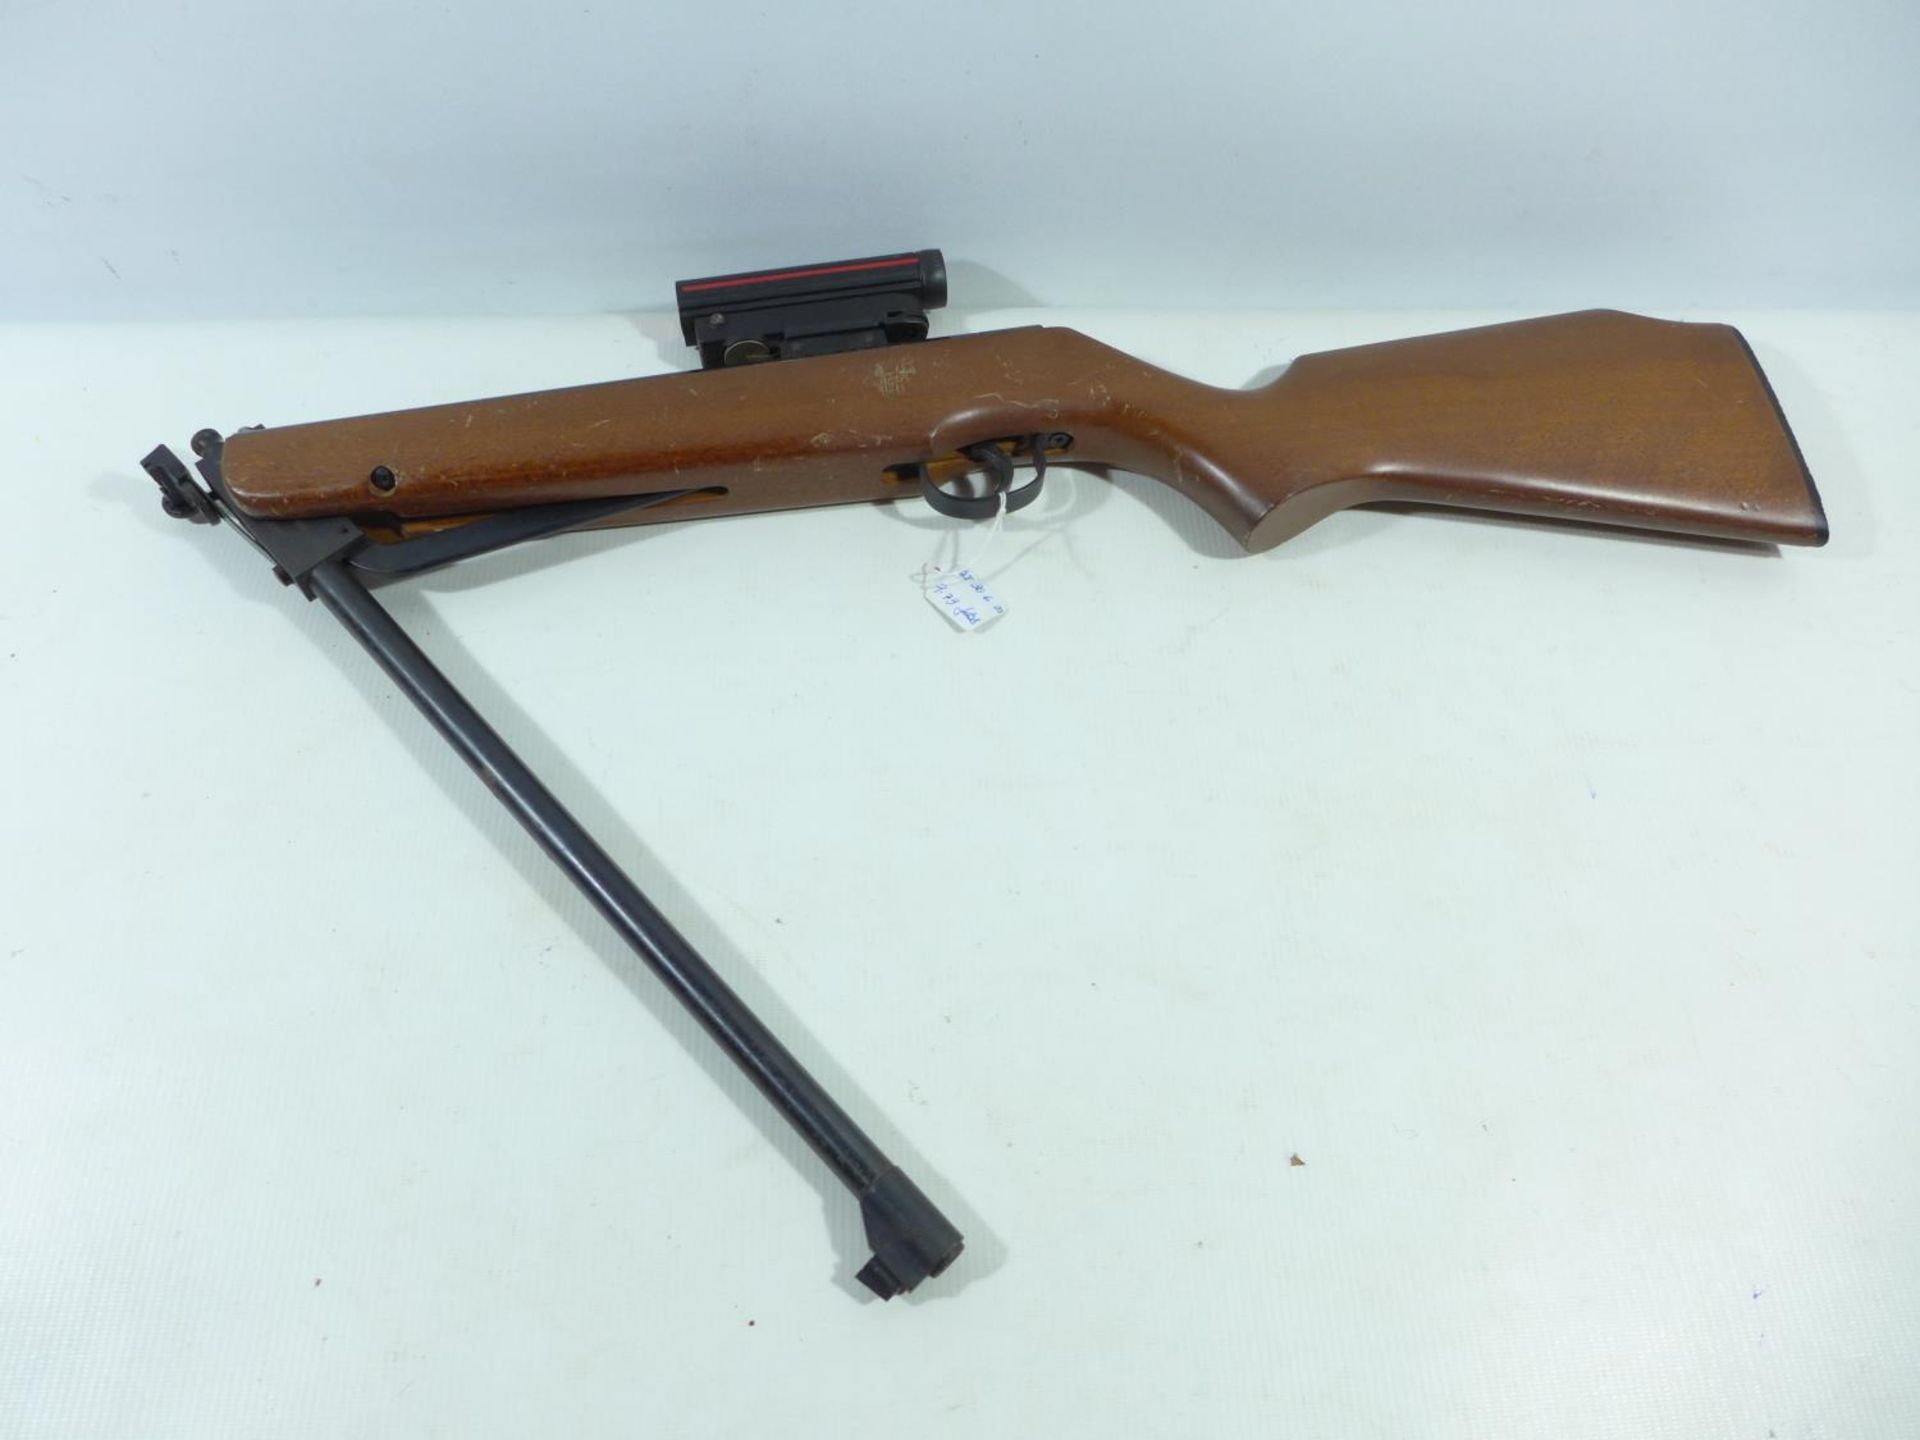 A WEBLEY AND SCOTT EXCEL .22 CALIBRE AIR RIFLE, 44CM BARREL, SERIAL NUMBER 831825, FITTED WITH - Image 6 of 7